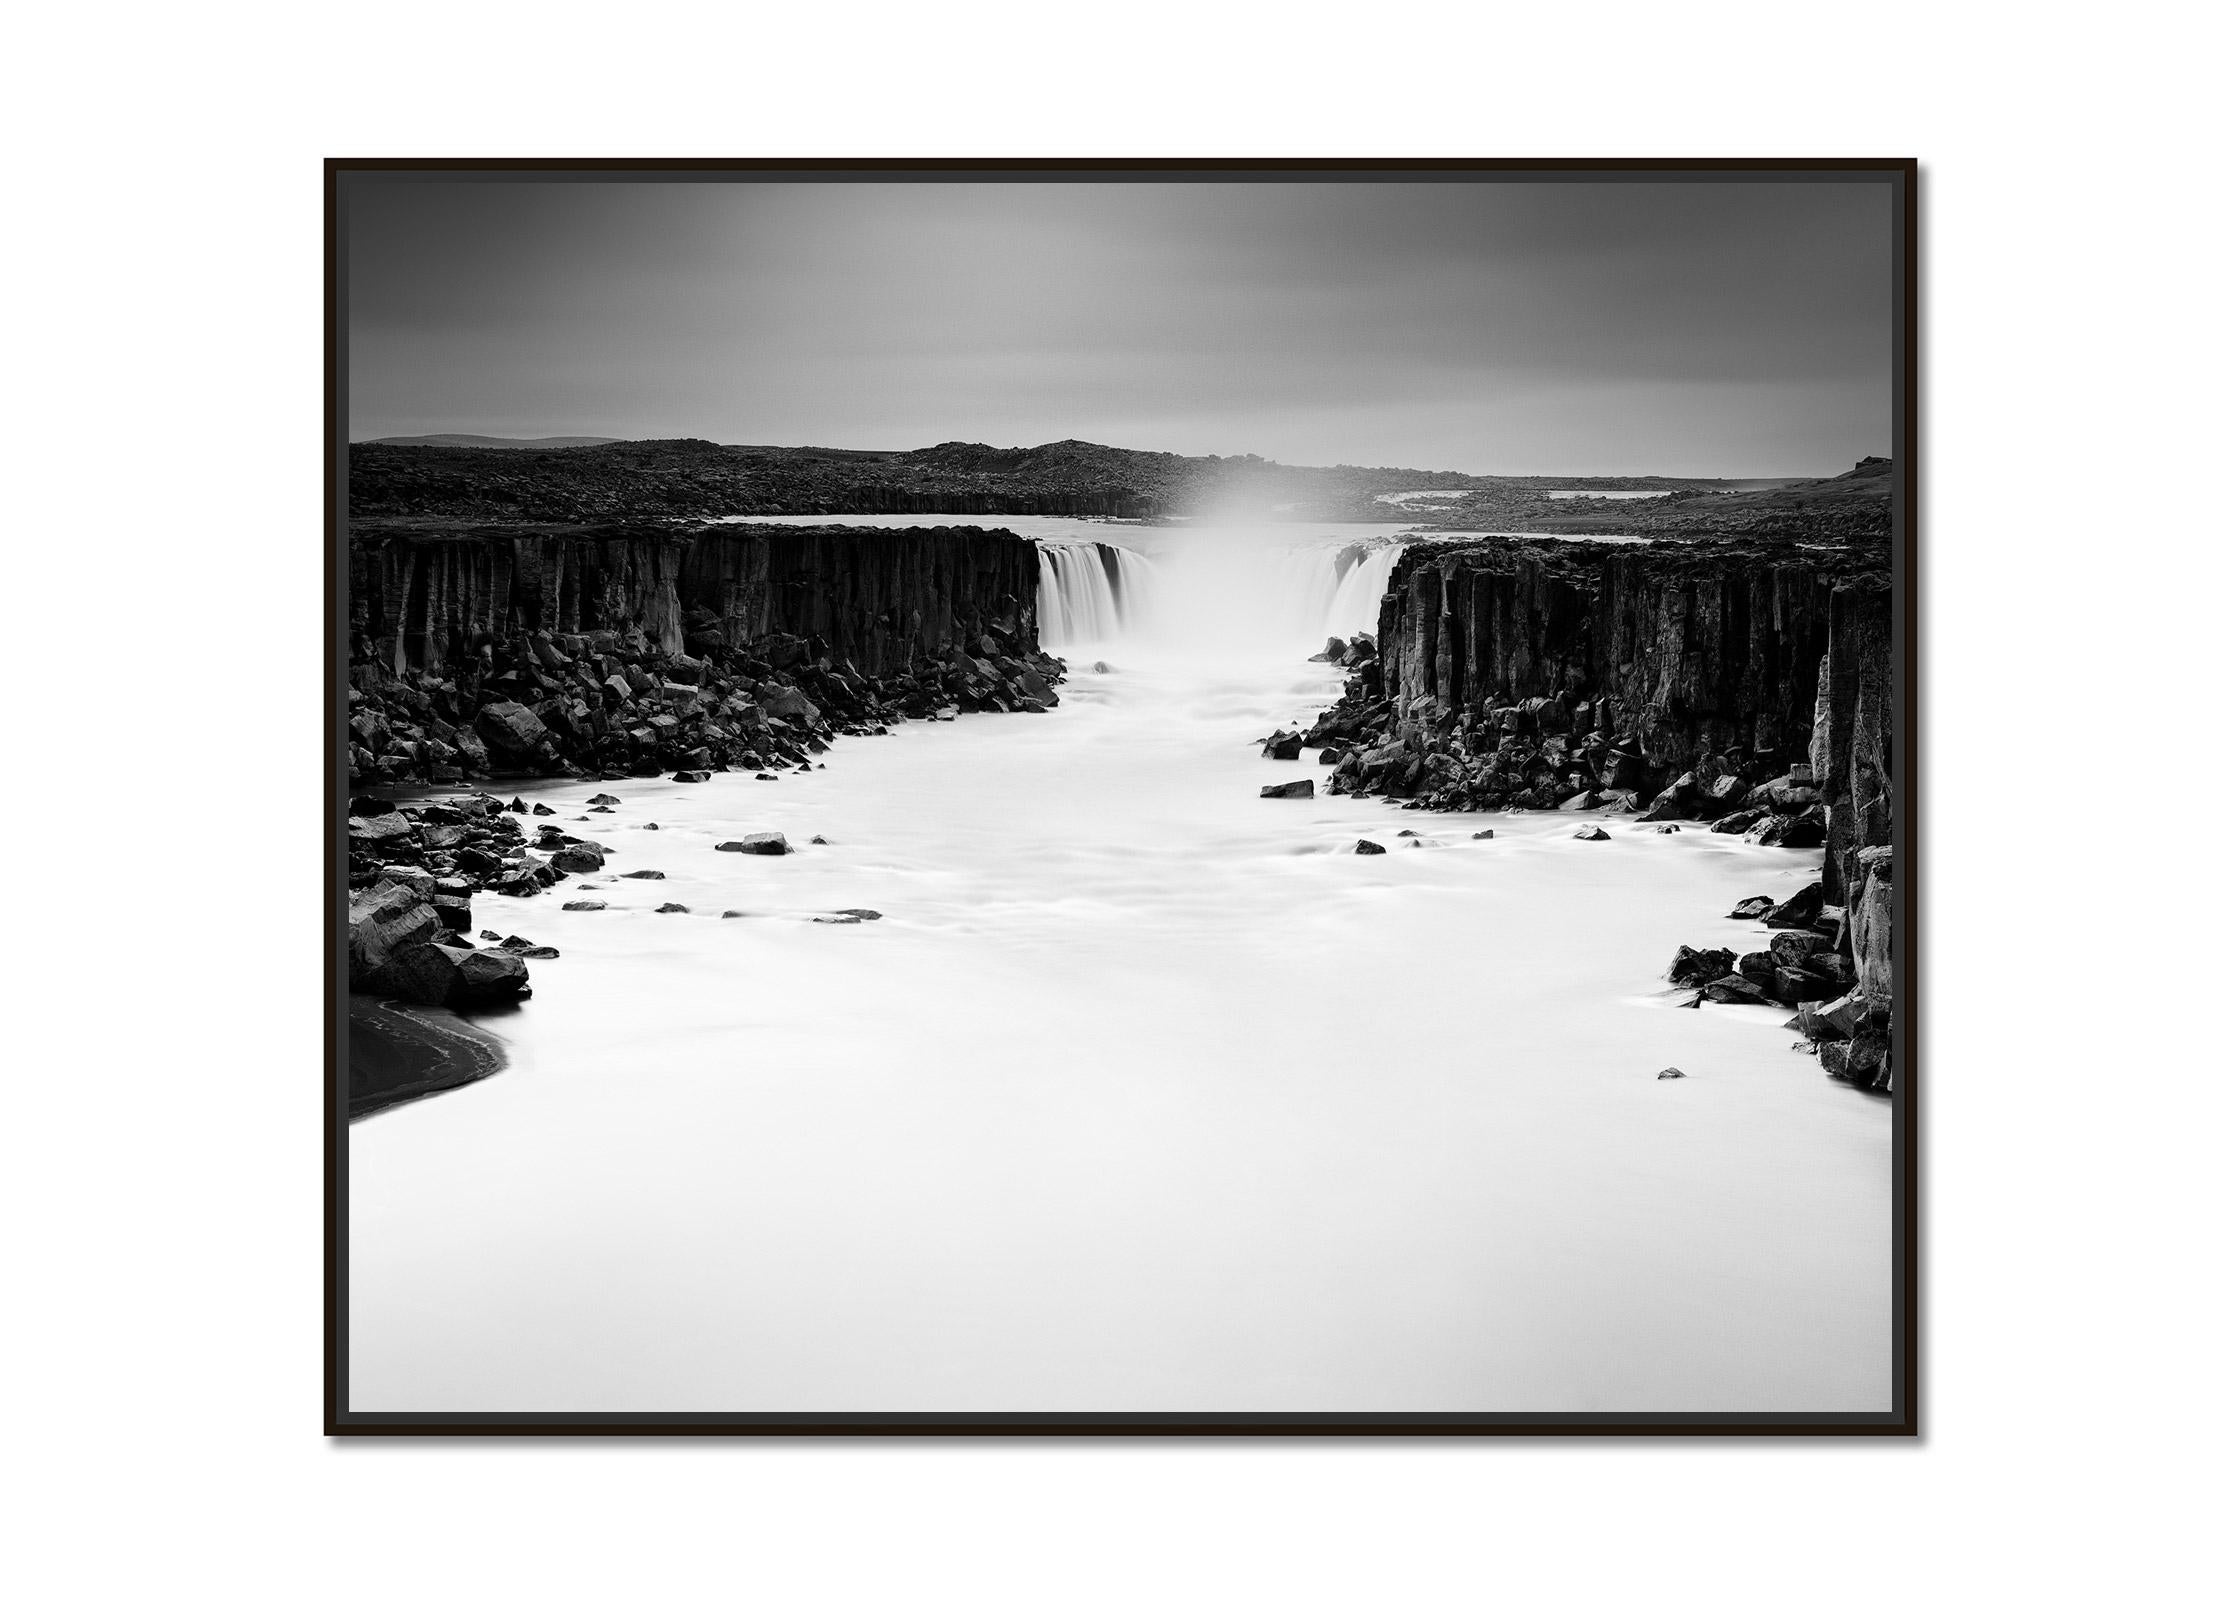 Dettifoss, Waterfall, Iceland, black and white photography, fine art, landscape - Photograph by Gerald Berghammer